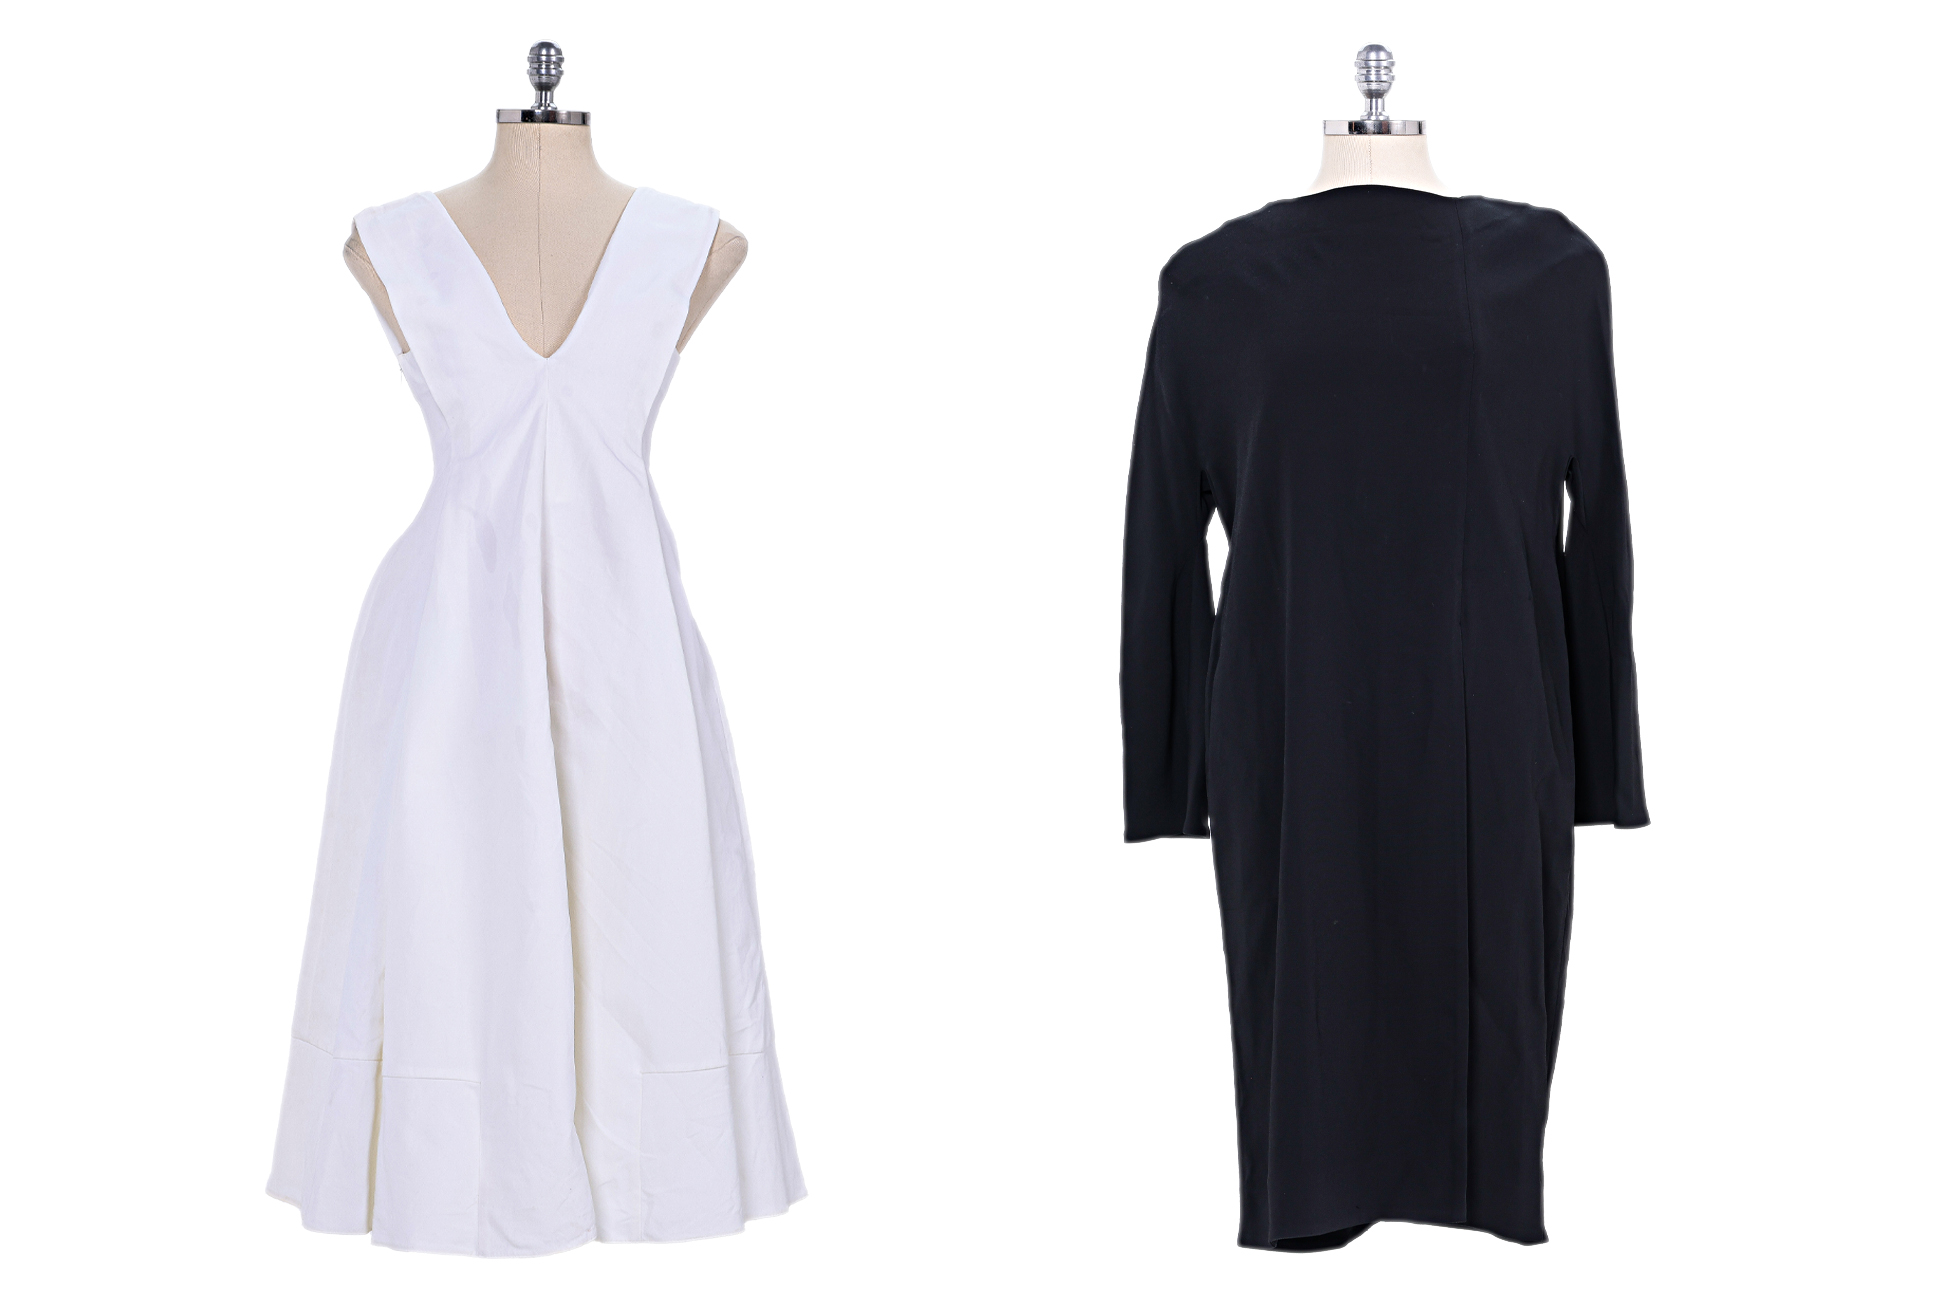 TWO MARNI DRESSES IN OFF-WHITE AND BLACK